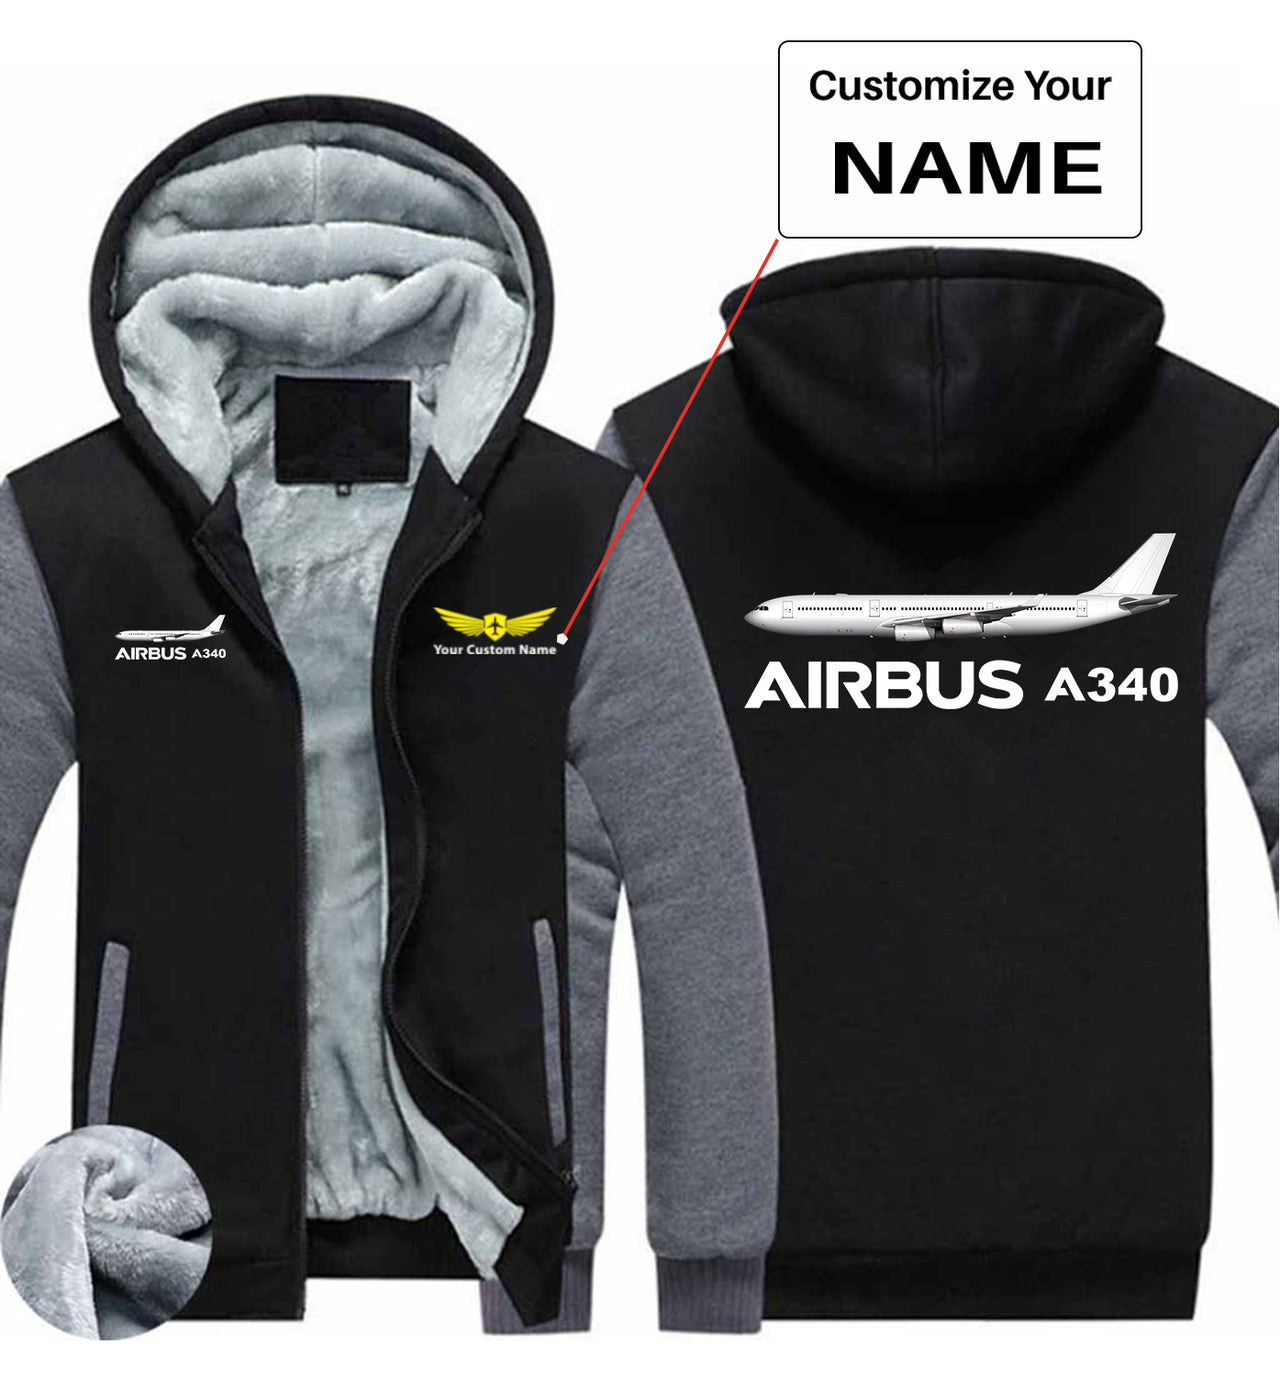 The Airbus A340 Designed Zipped Sweatshirts